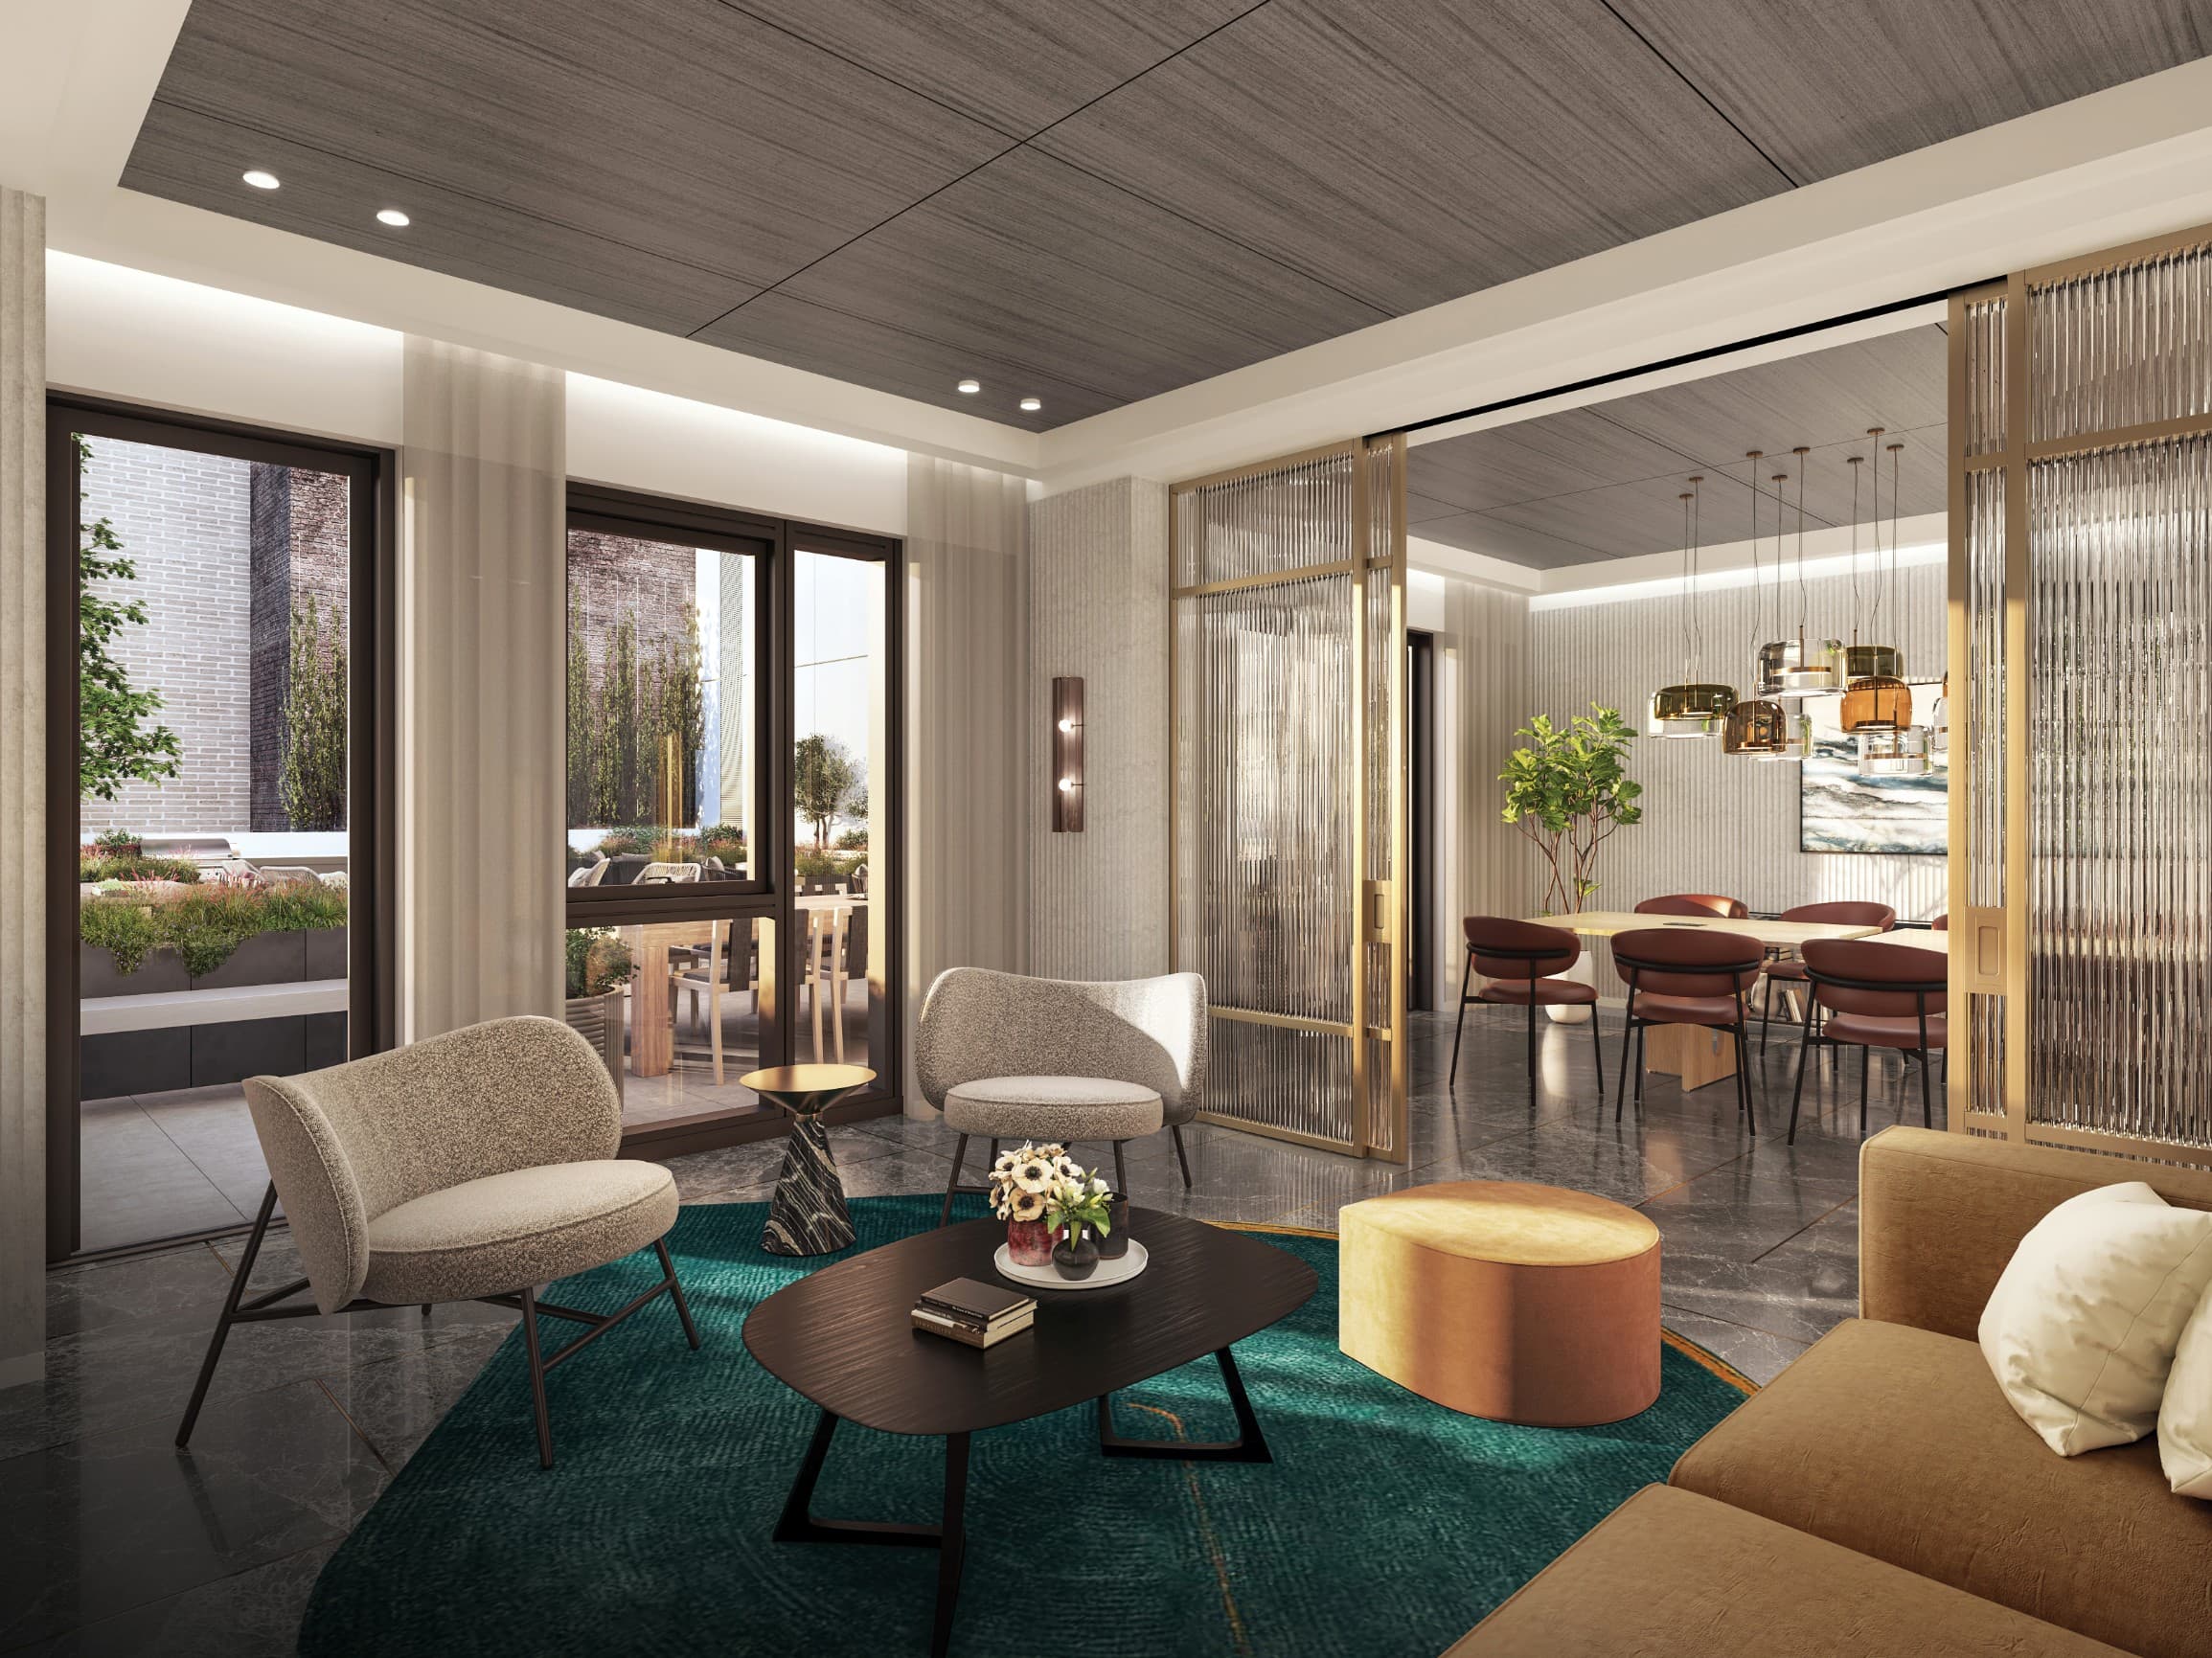 300 West 30th Street brings a new way of living in the city of possibilities